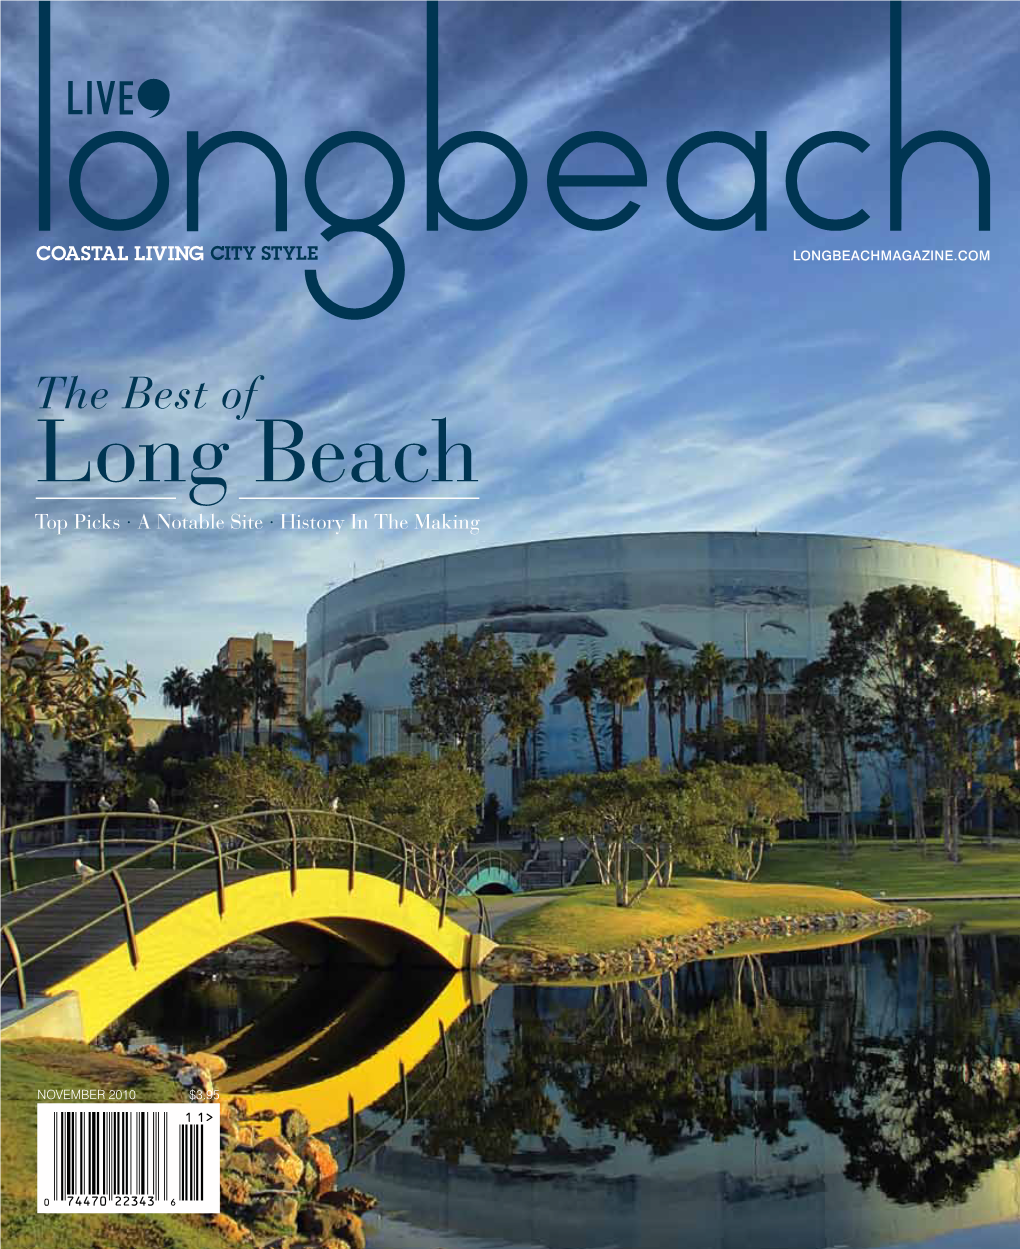 Long Beach Top Picks · a Notable Site · History in the Making